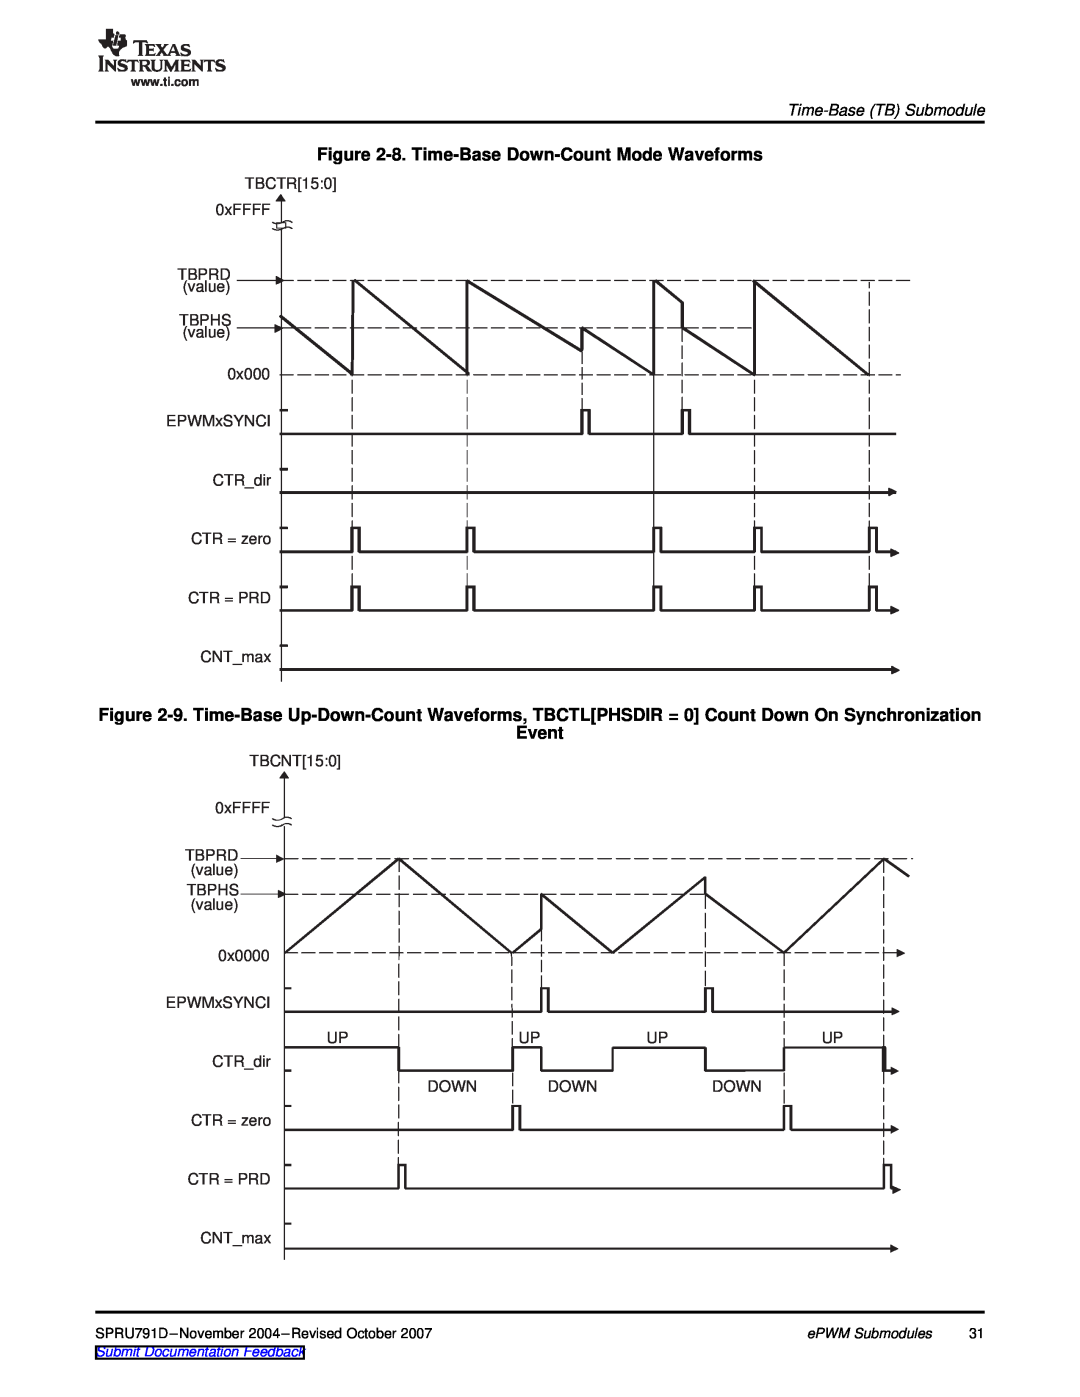 Texas Instruments 28xxx, TMS320x28xx manual 8. Time-Base Down-Count Mode Waveforms, Event, Time-Base TB Submodule 